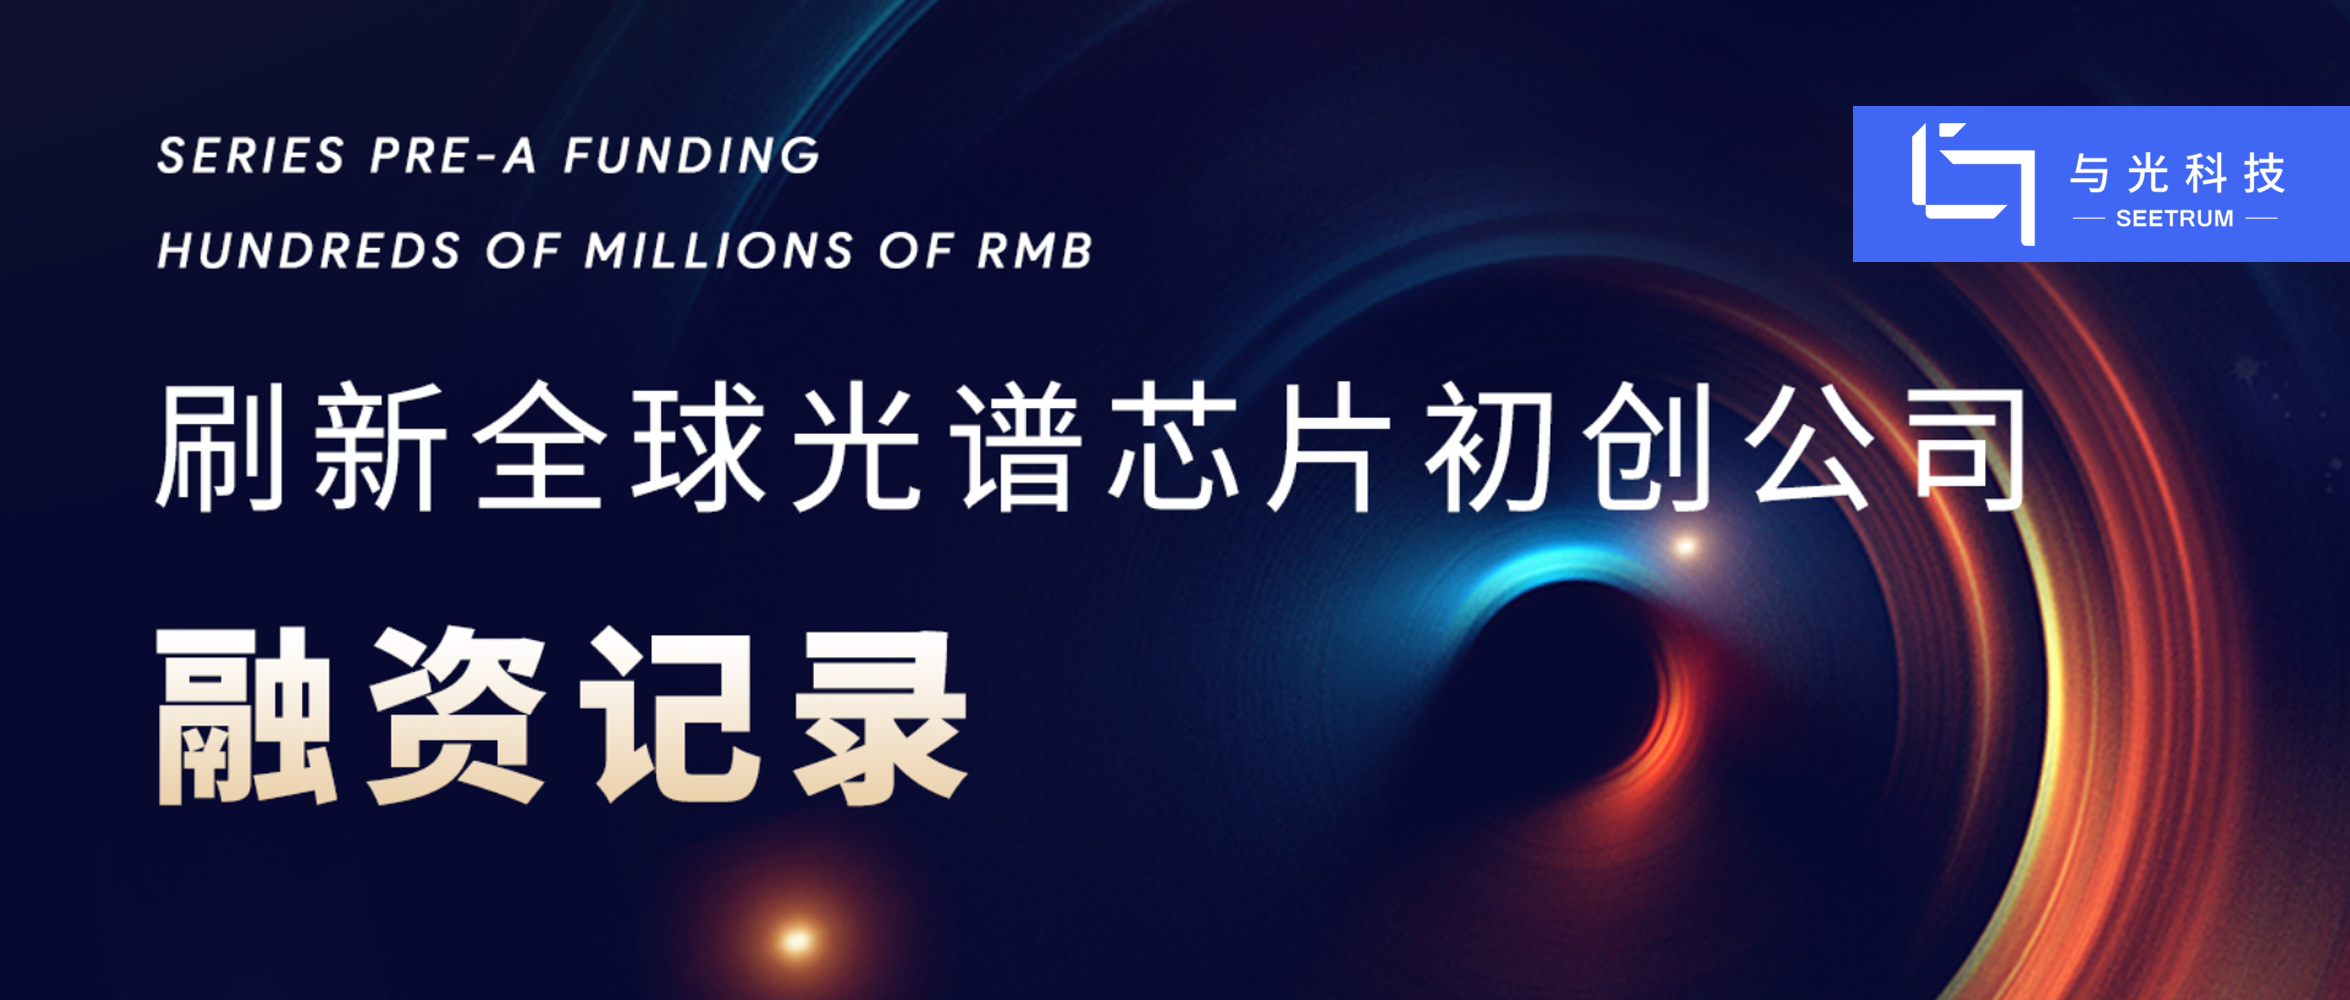 SEETRUM Completed a Pre-A round of financing of Everal Hundred Million RMB